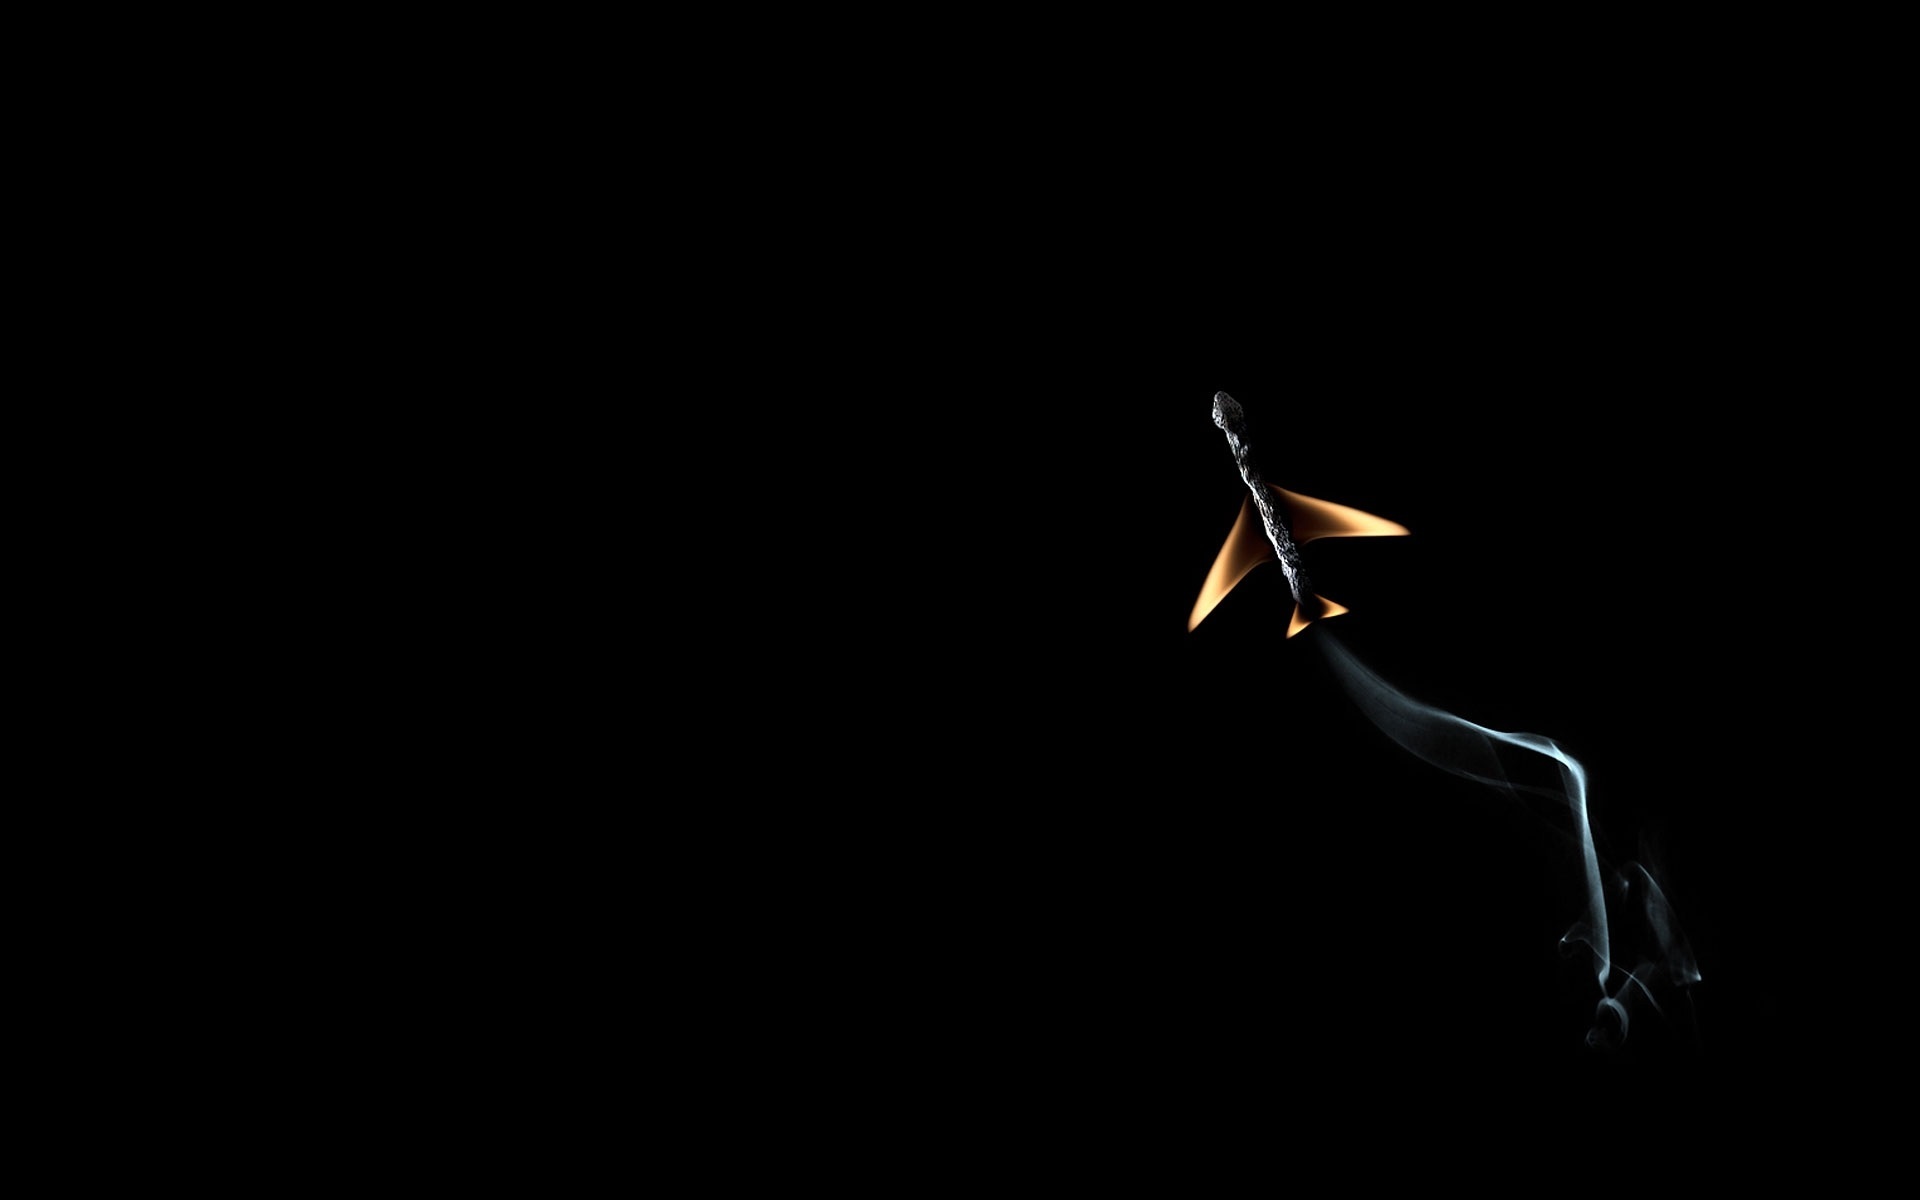 Download wallpaper the plane, creative, fire, smoke, match, black background, section minimalism in resolution 1920x1200